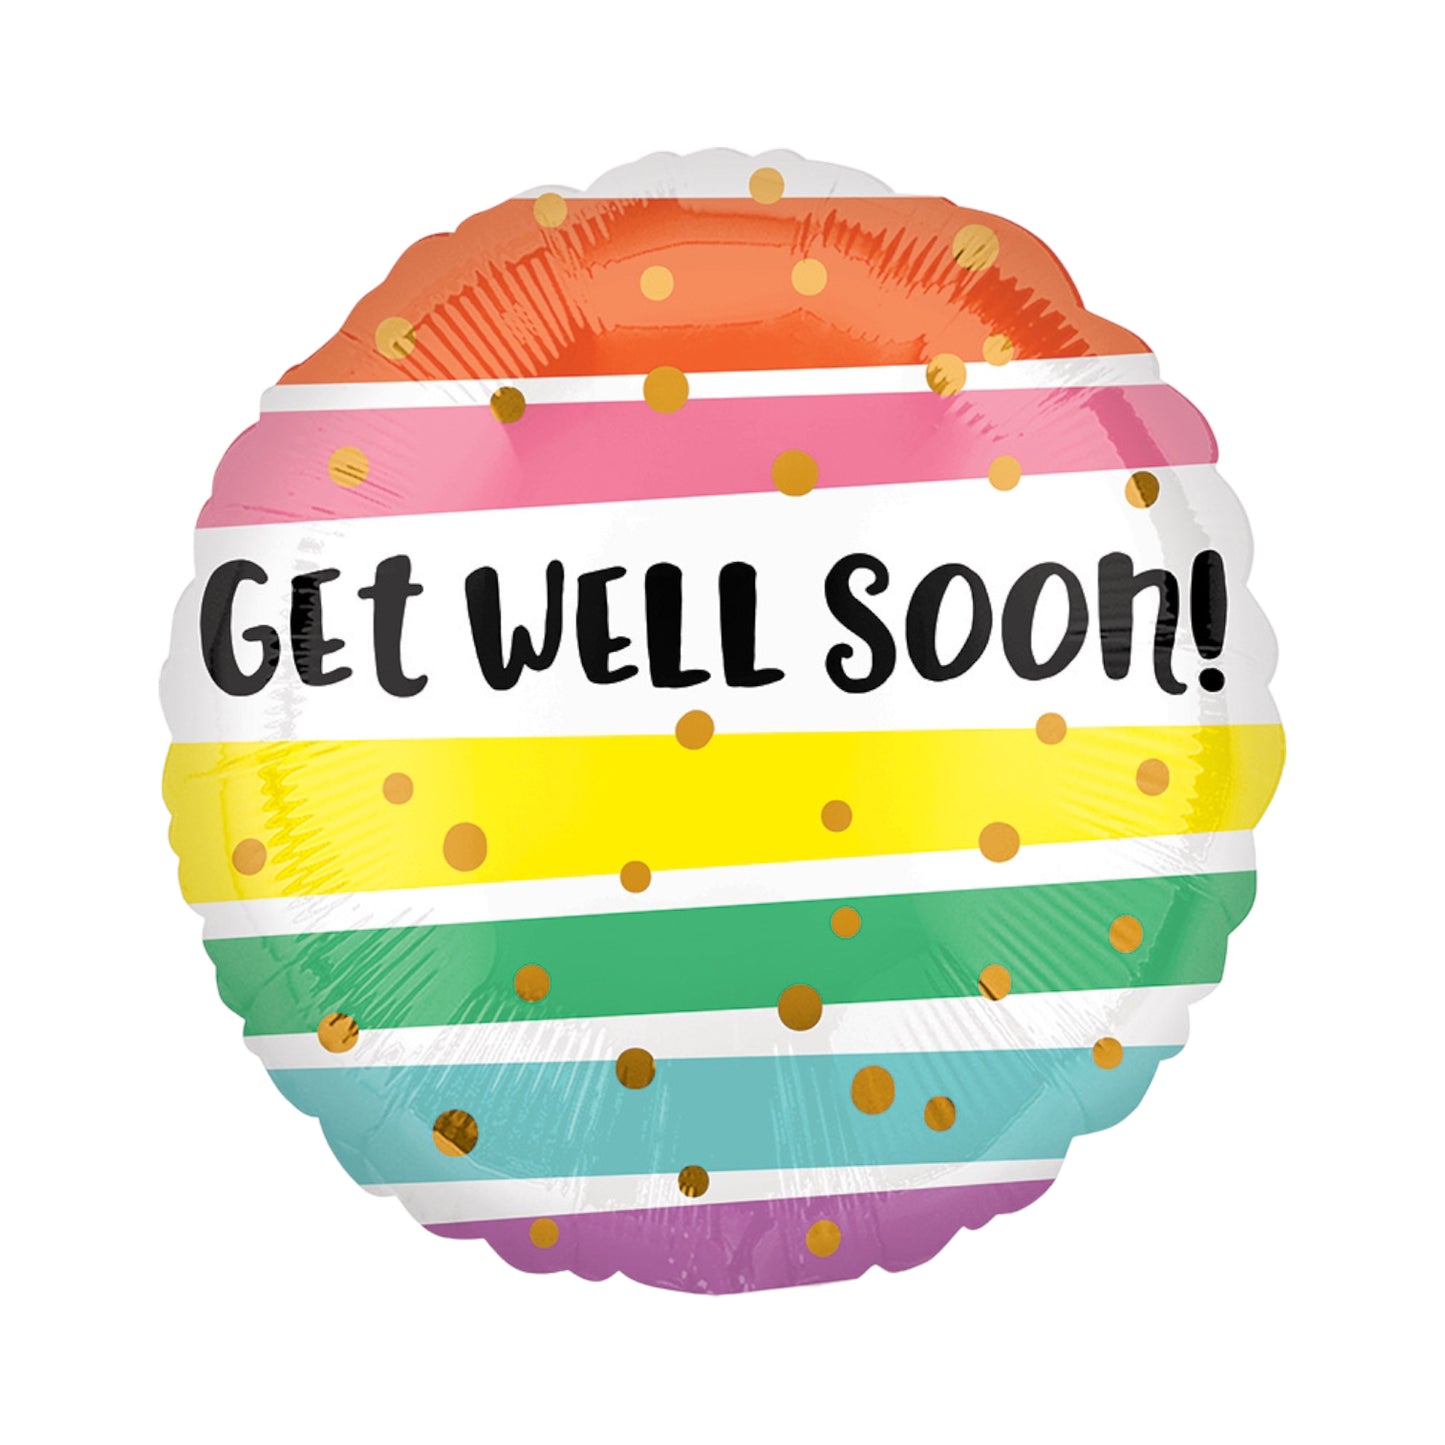 Get Well Soon Balloon - Stripes and Dots.